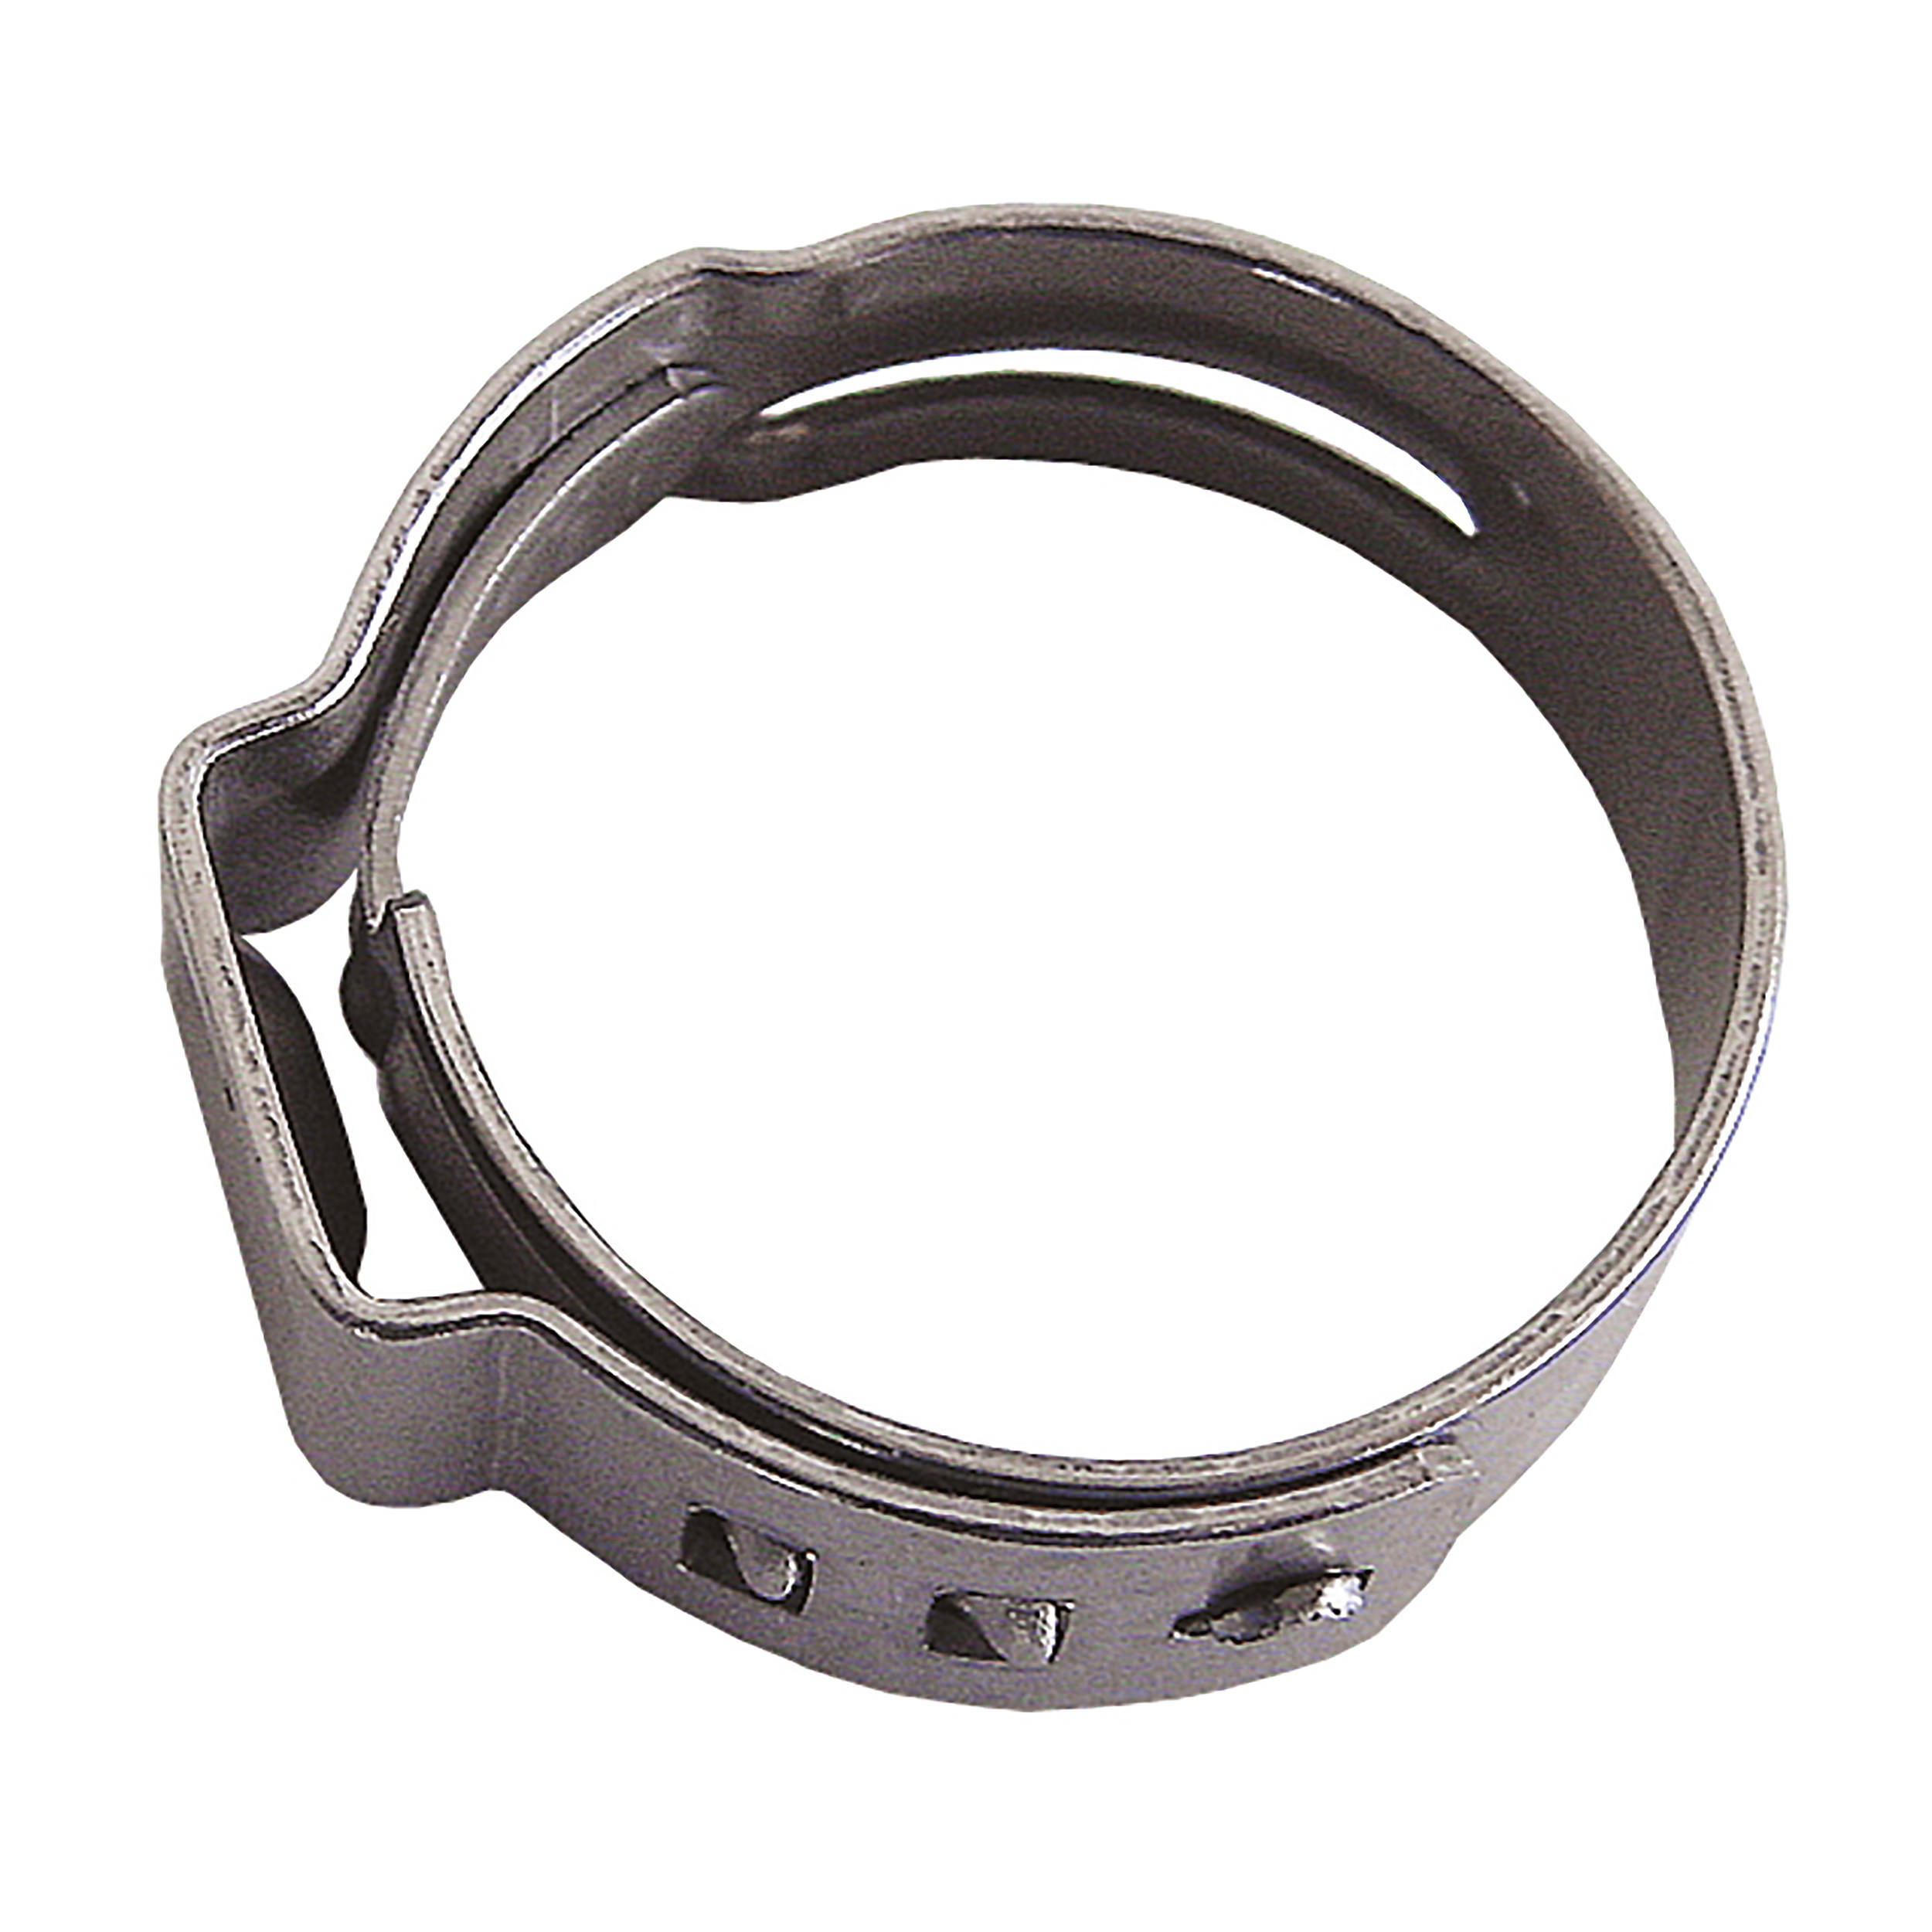 Stepless hose clamps made of stainless steel (1.4016)